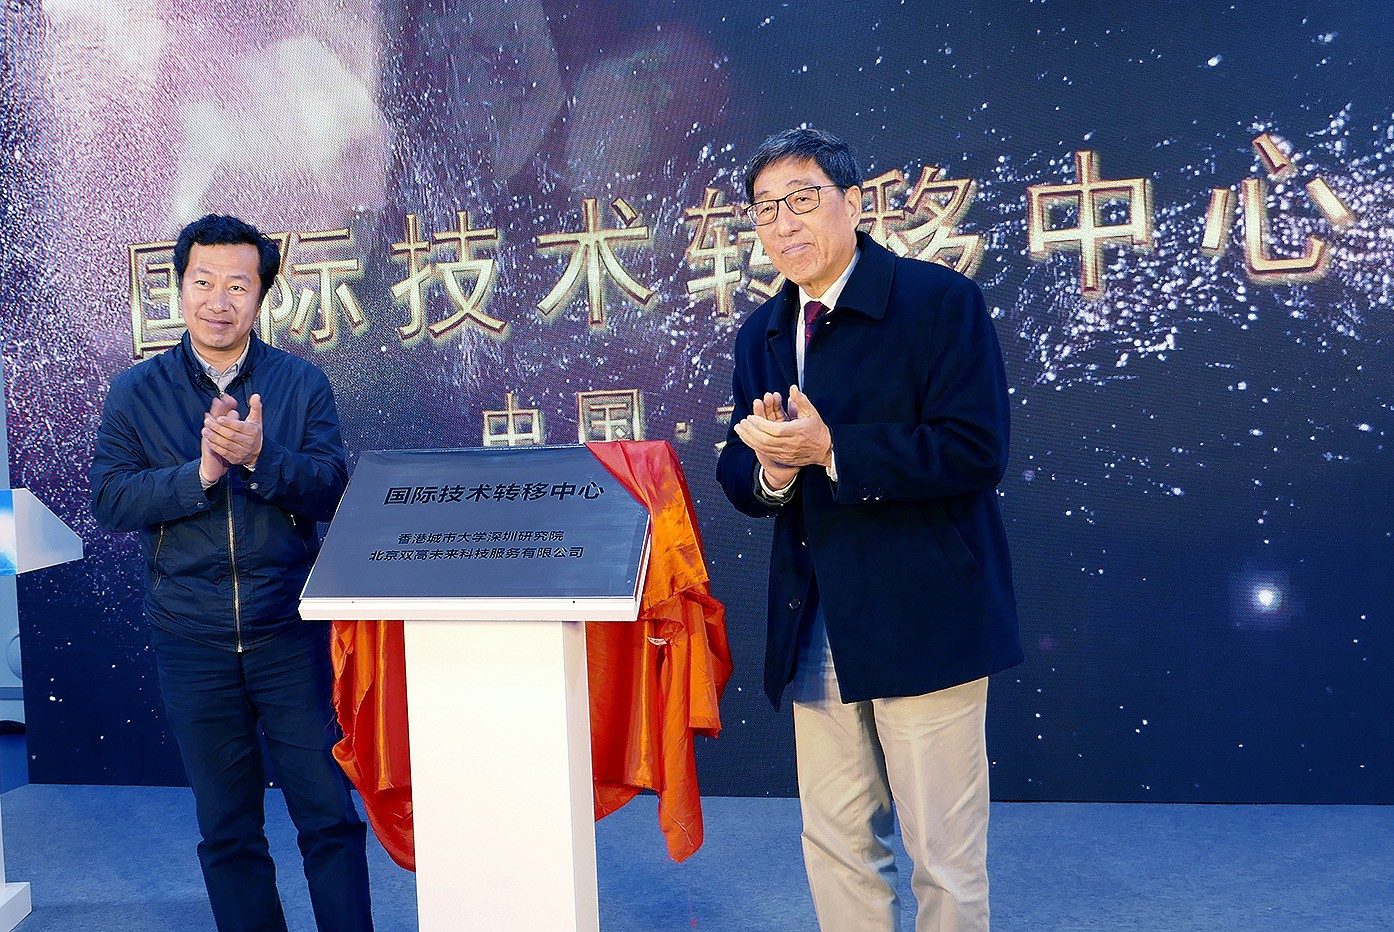 President Kuo (right) and Mr Liu Minhua unveil the plaque for the International Technology Transfer Centre.